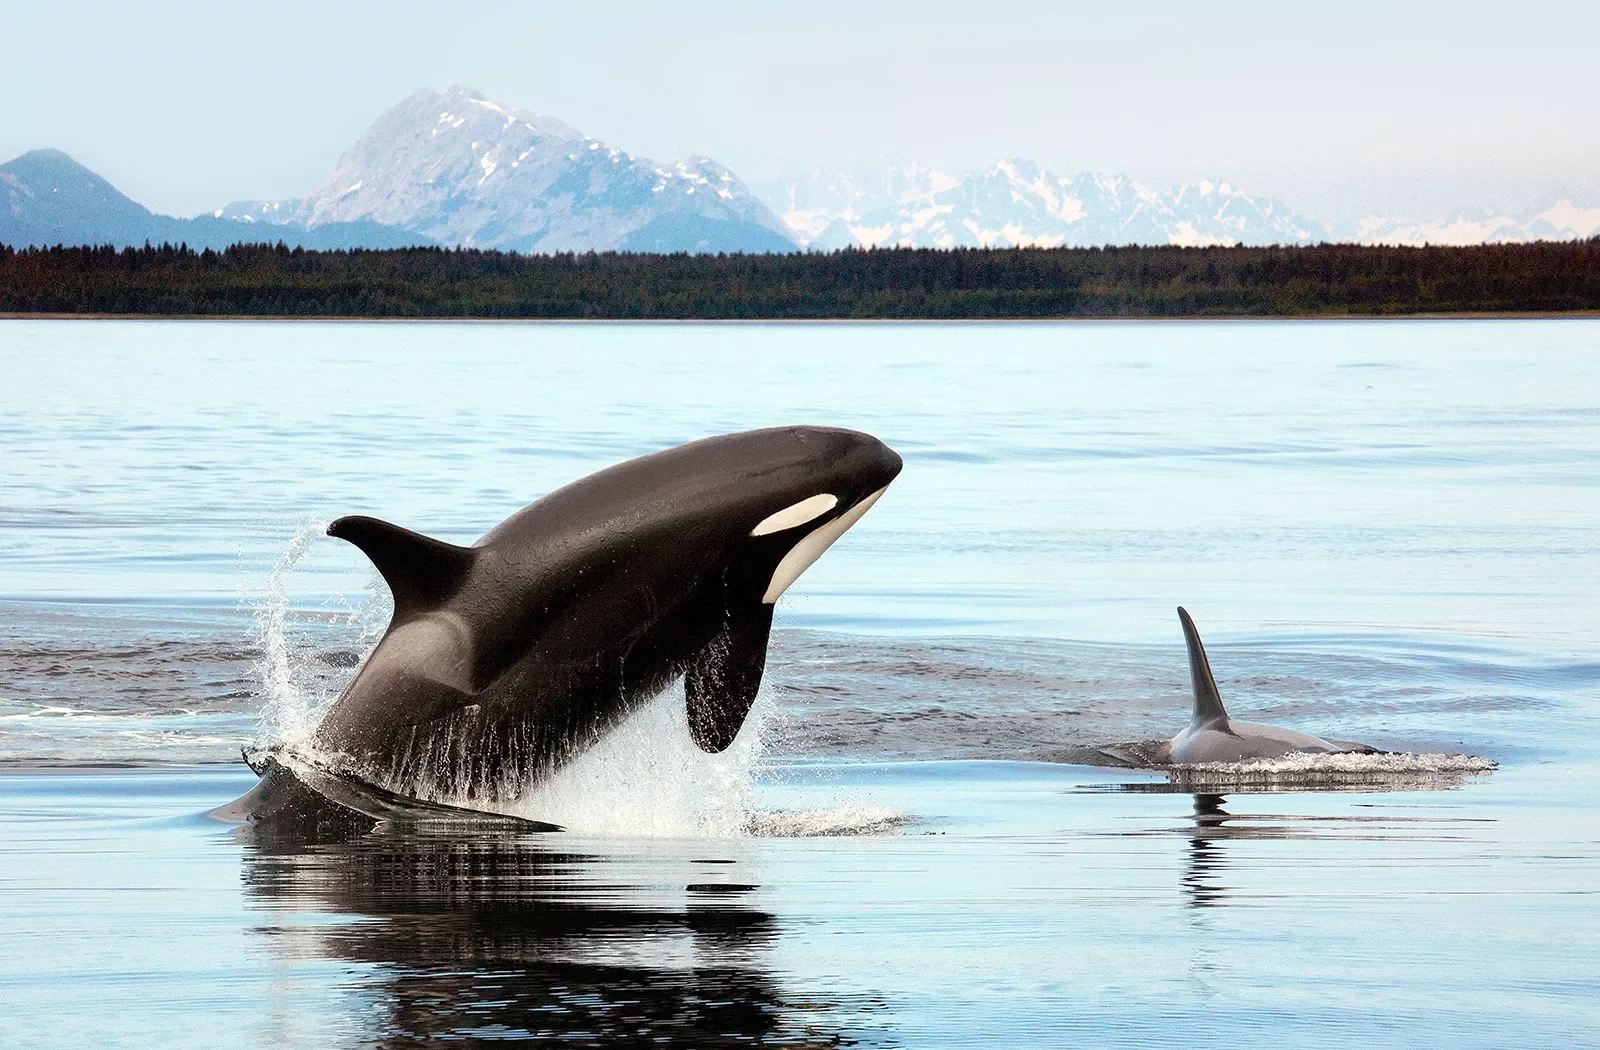 Two orcas in lake, one breaching.